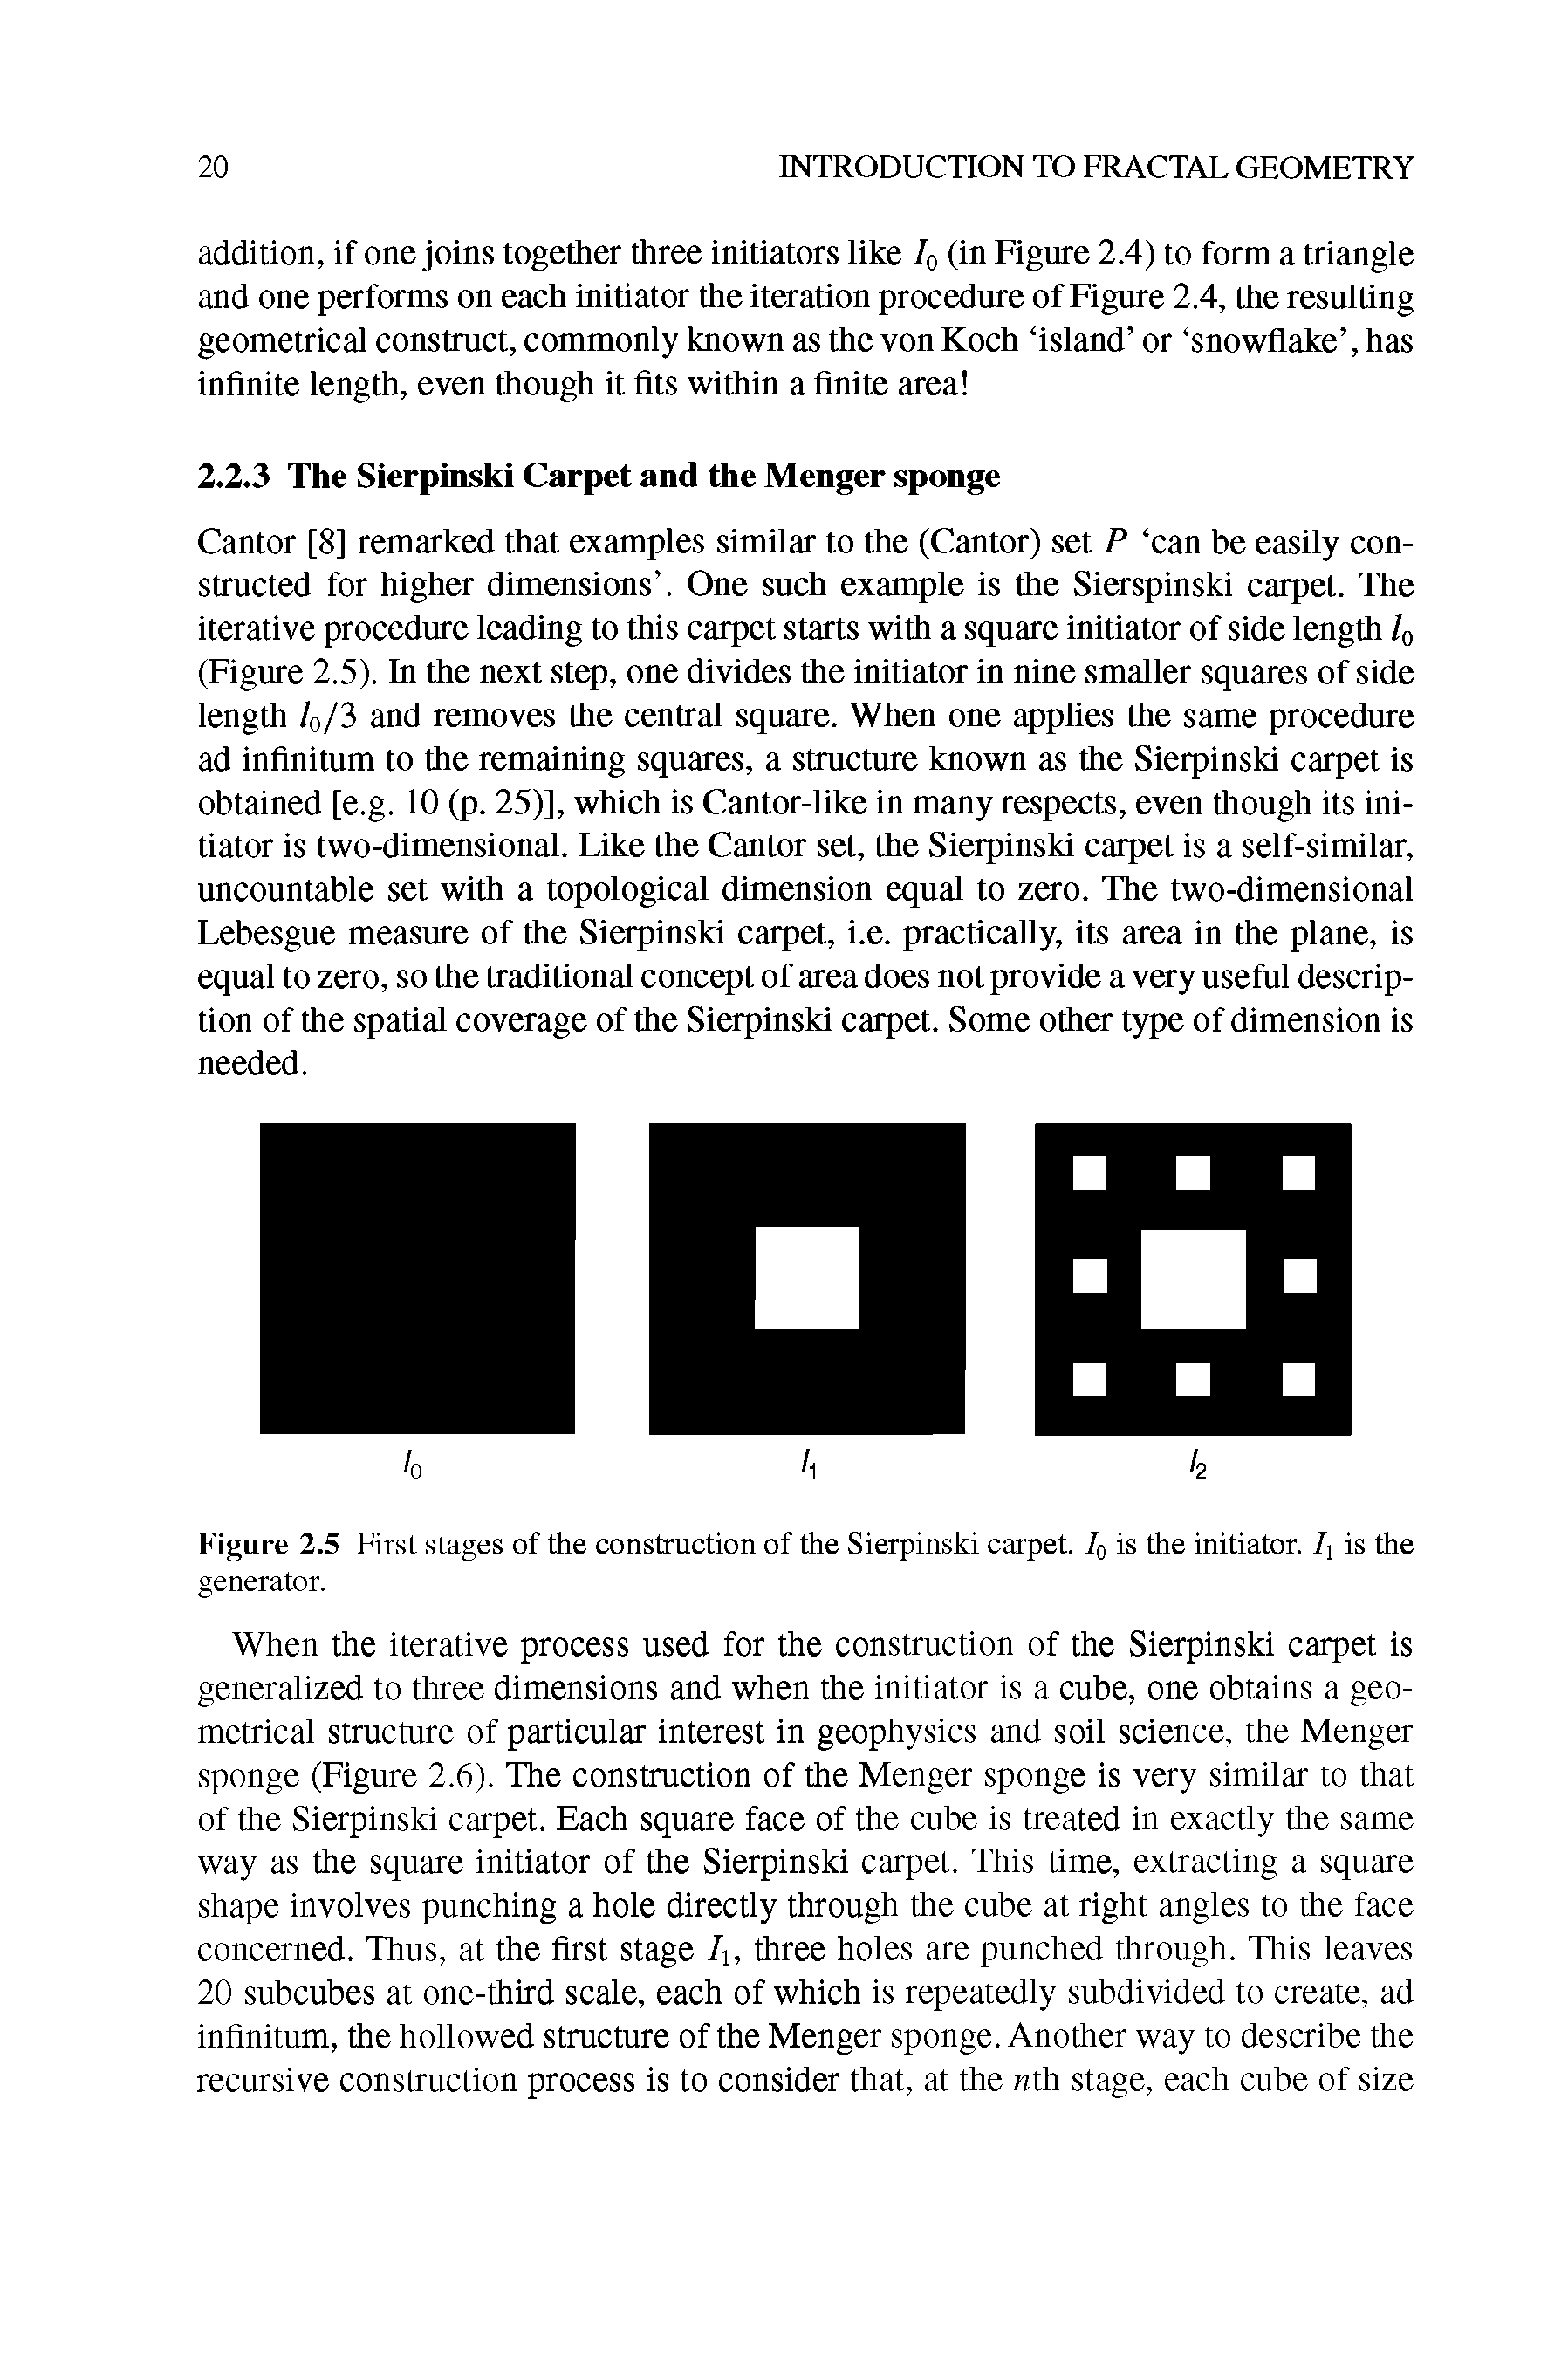 Figure 2.5 First stages of the construction of the Sierpinski carpet. 7o is the initiator. Ii is the...